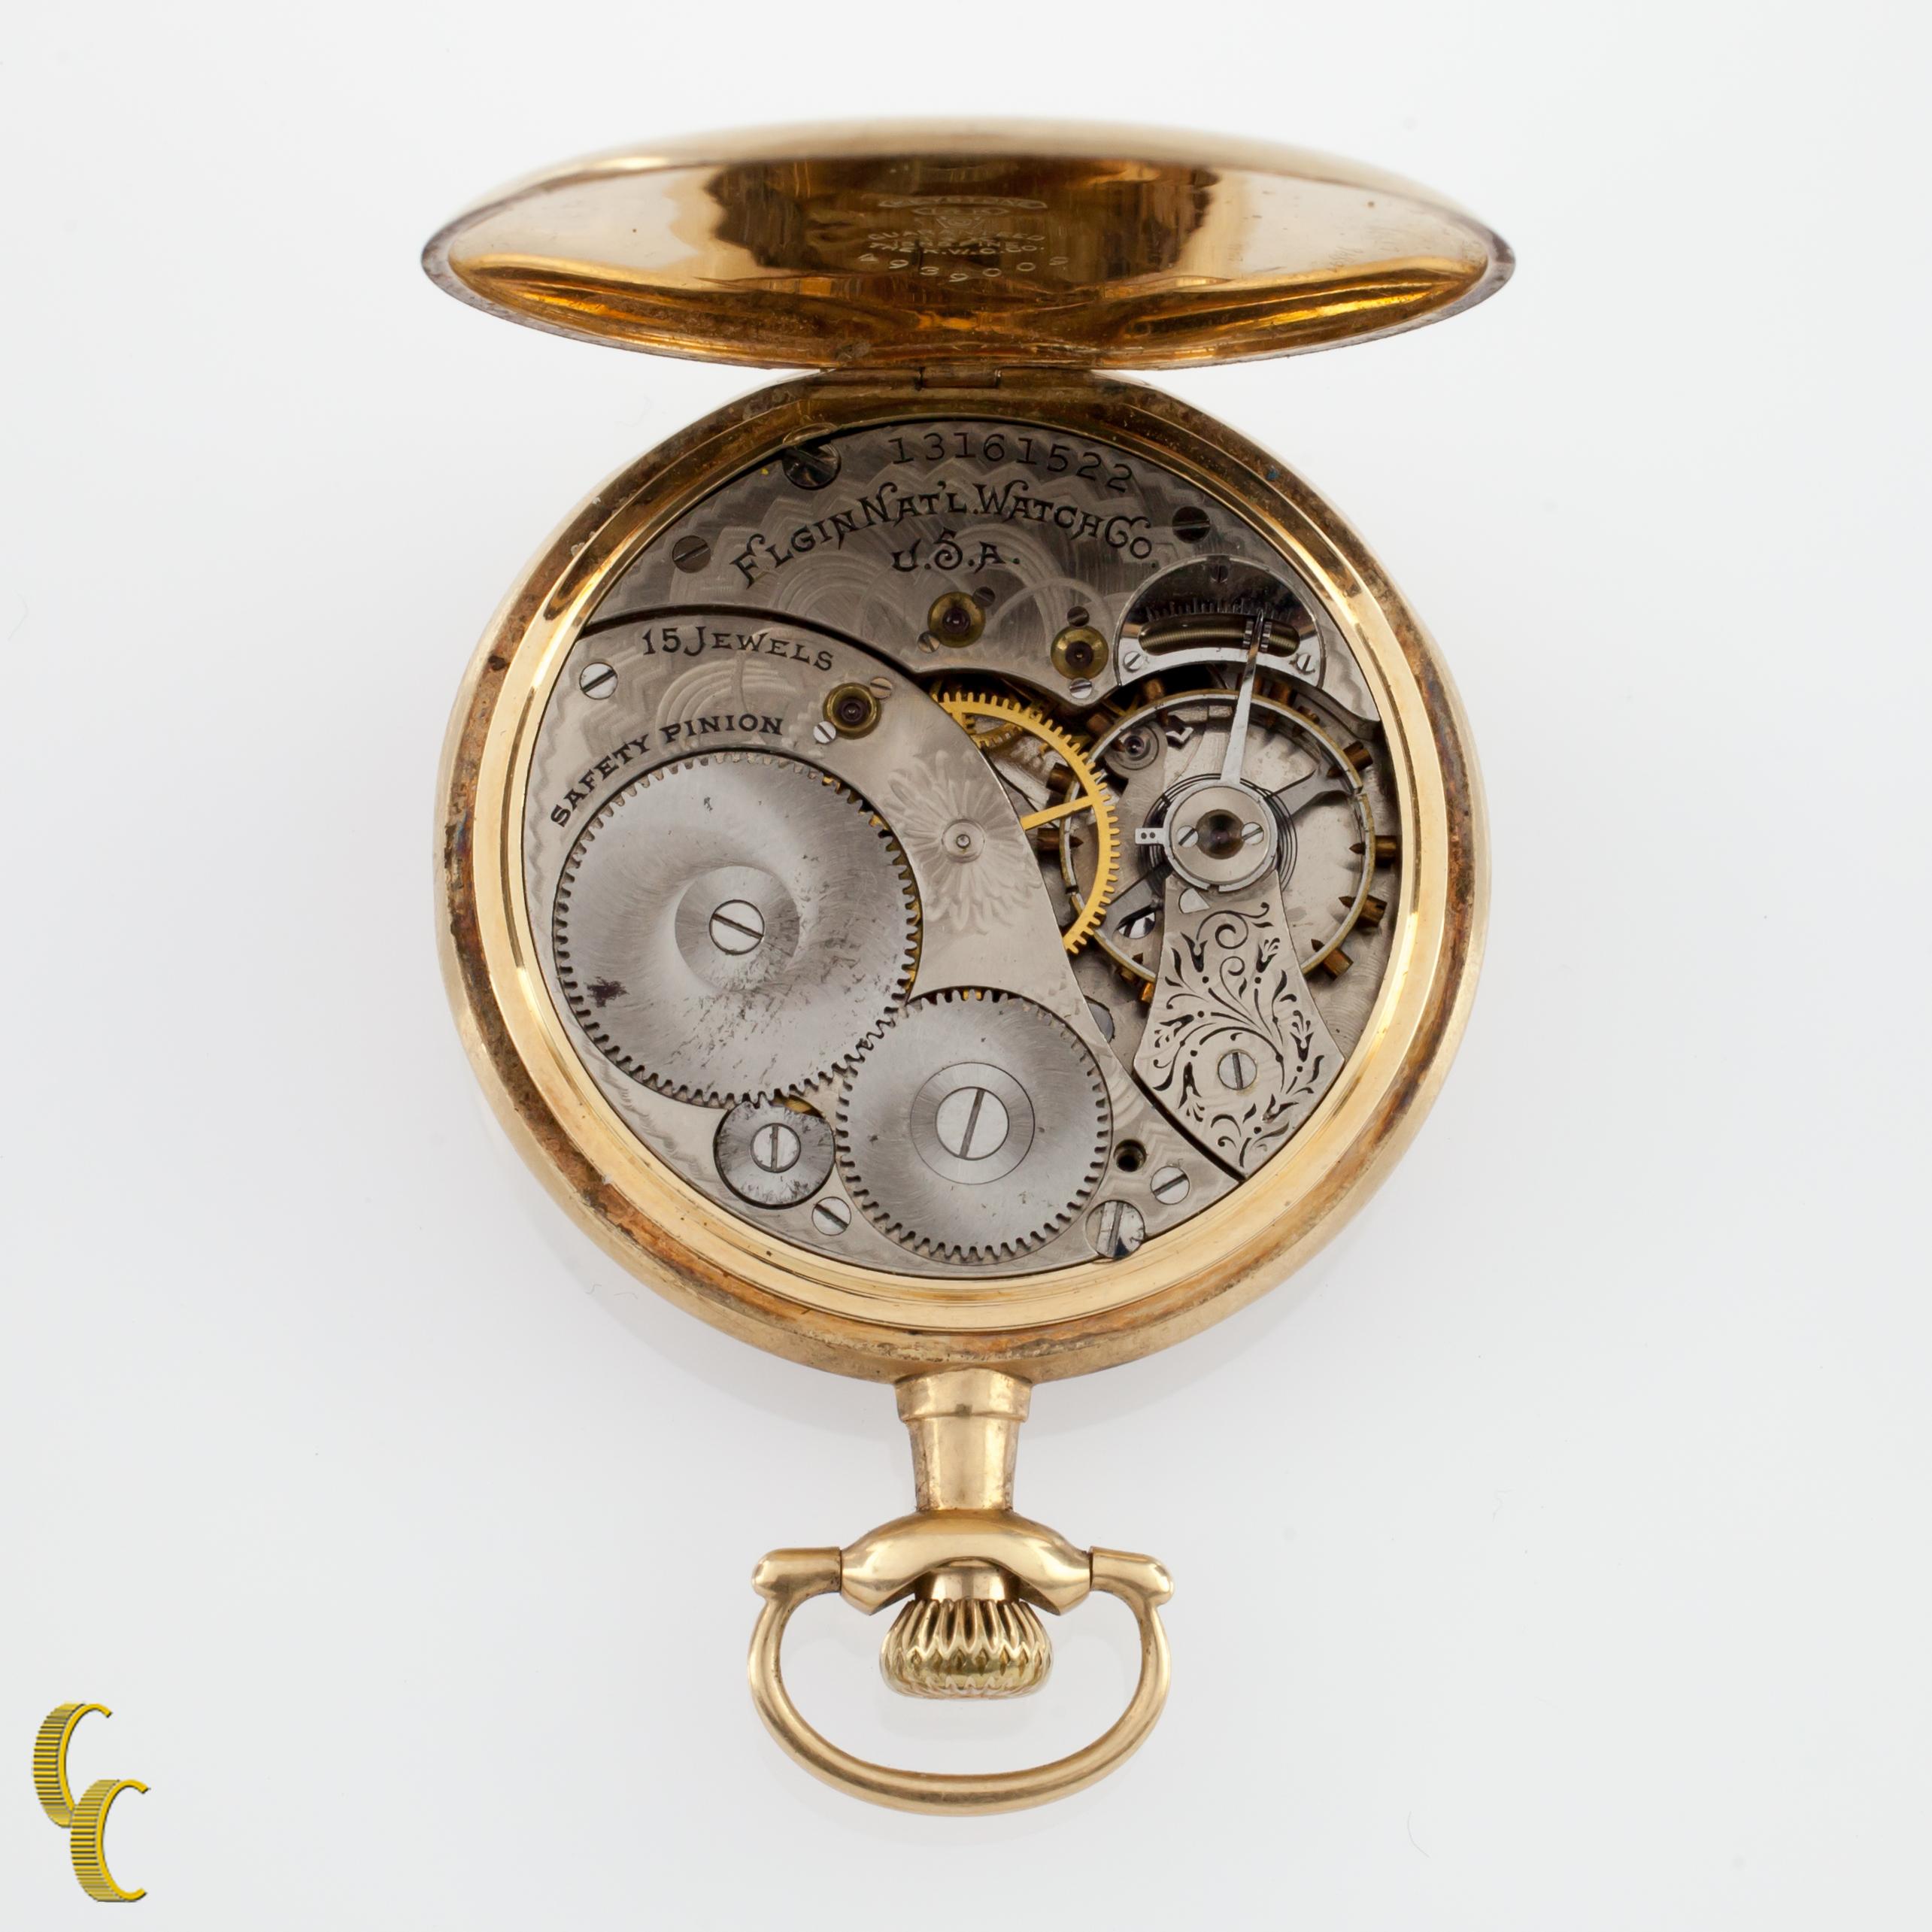 Beautiful Antique Elgin Pocket Watch w/ White Dial Including Gold Hands & Dedicated Second Dial
14k Yellow Solid Gold Case w/ Intricate Hand-Etched Feather Design on Reverse of Case
Gold Arabic Numerals
Case Serial #4939009
15-Jewel Elgin Movement